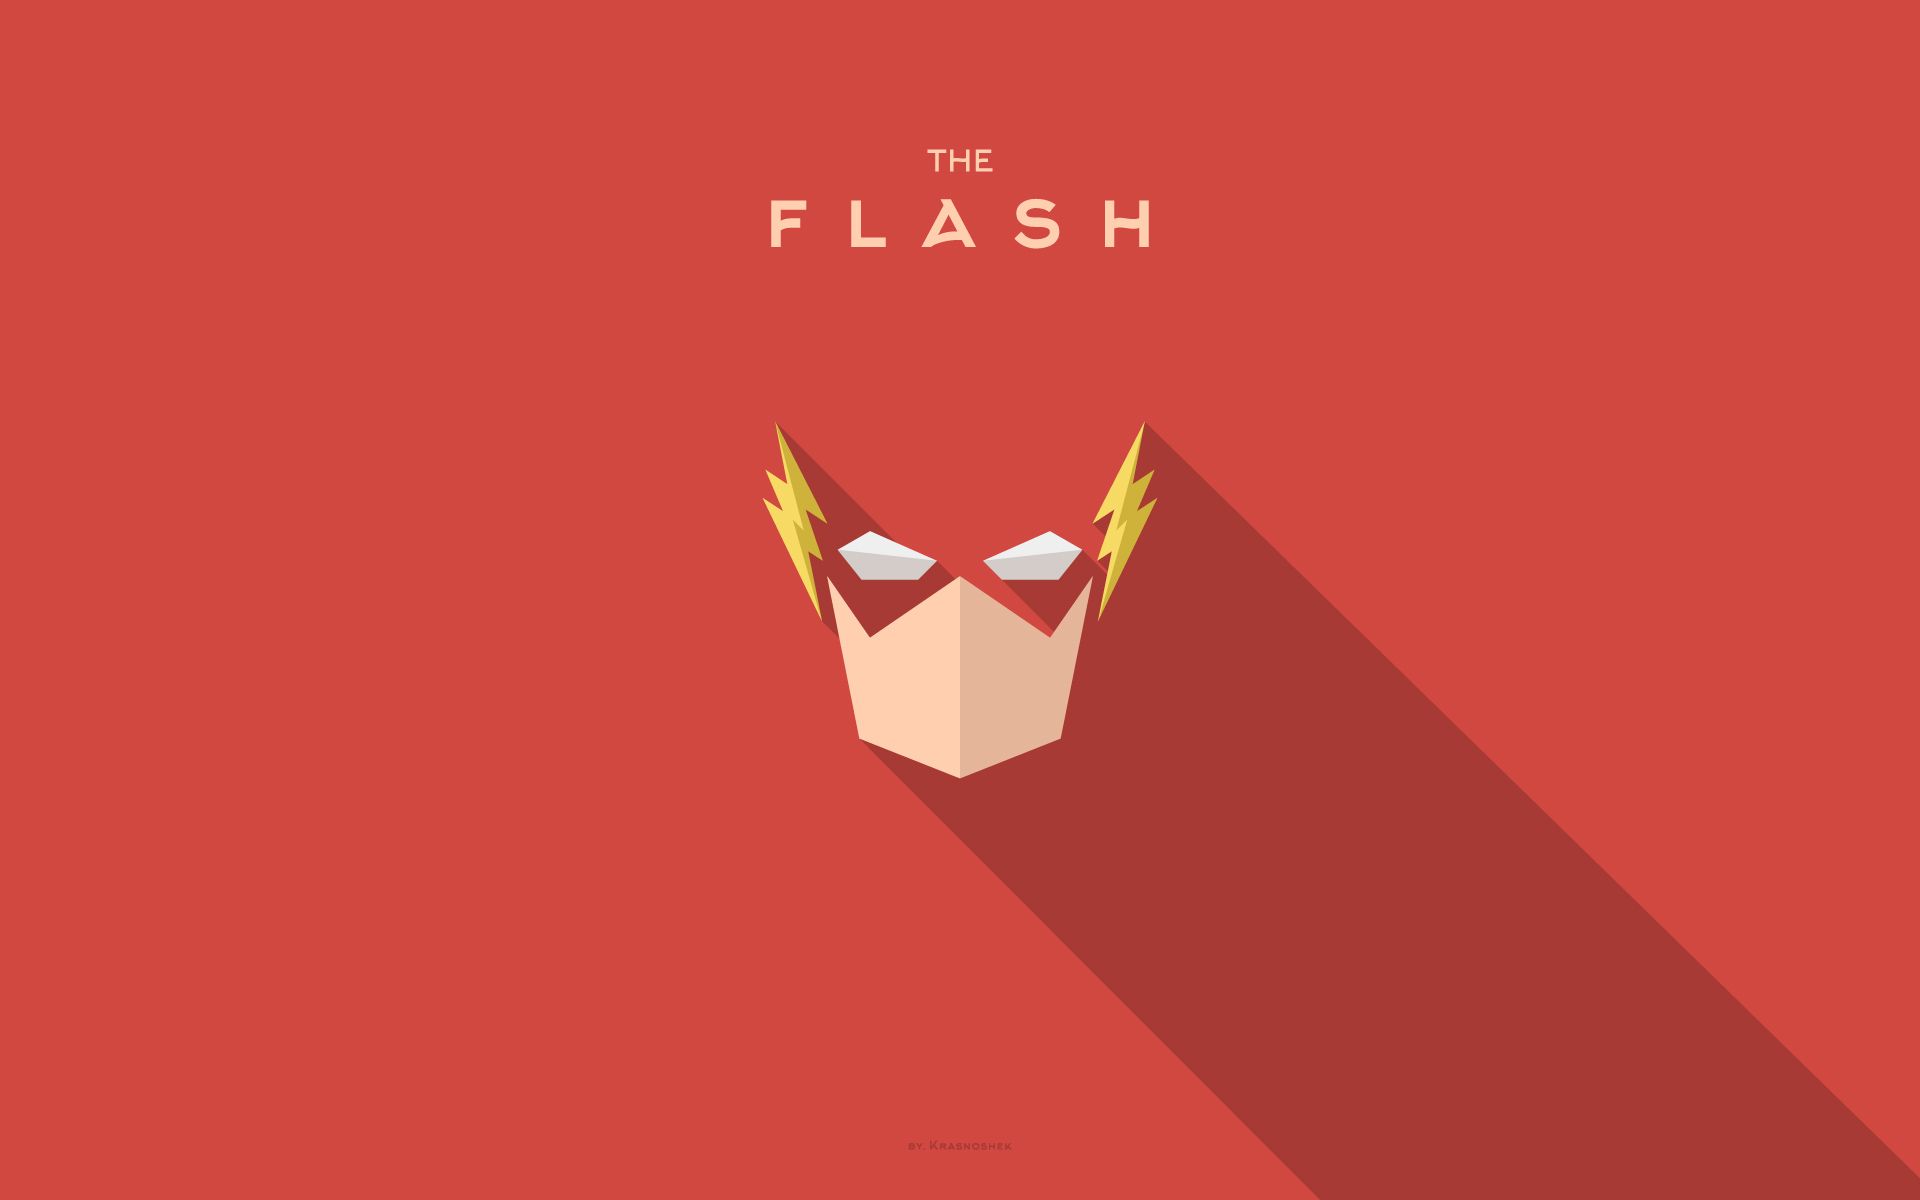 Awesome Flash wallpaper. Link to more sizes in comments. : FlashTV